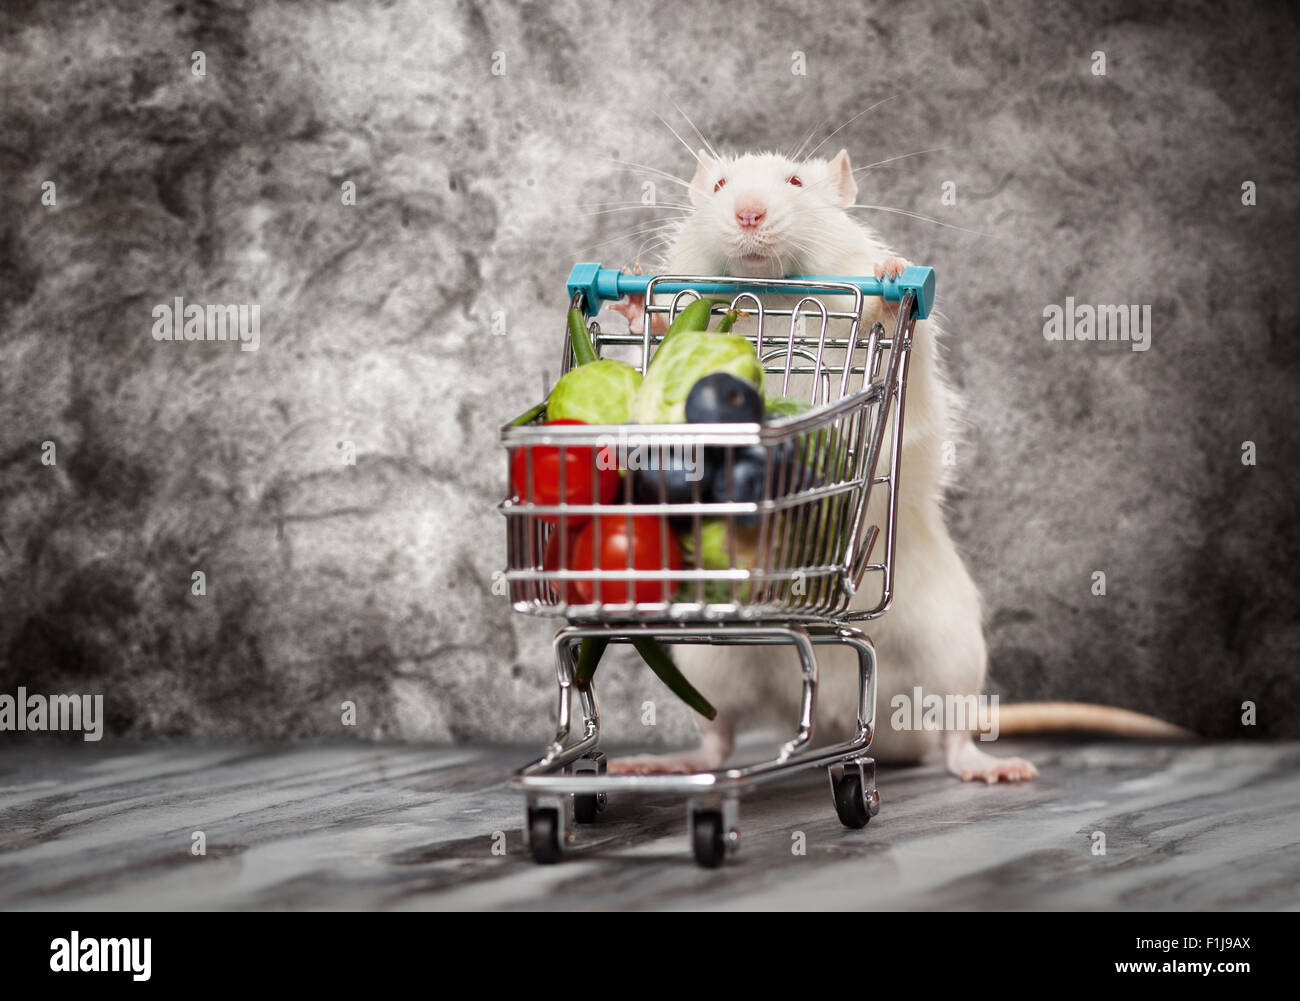 Cute rat with a shopping cart Stock Photo